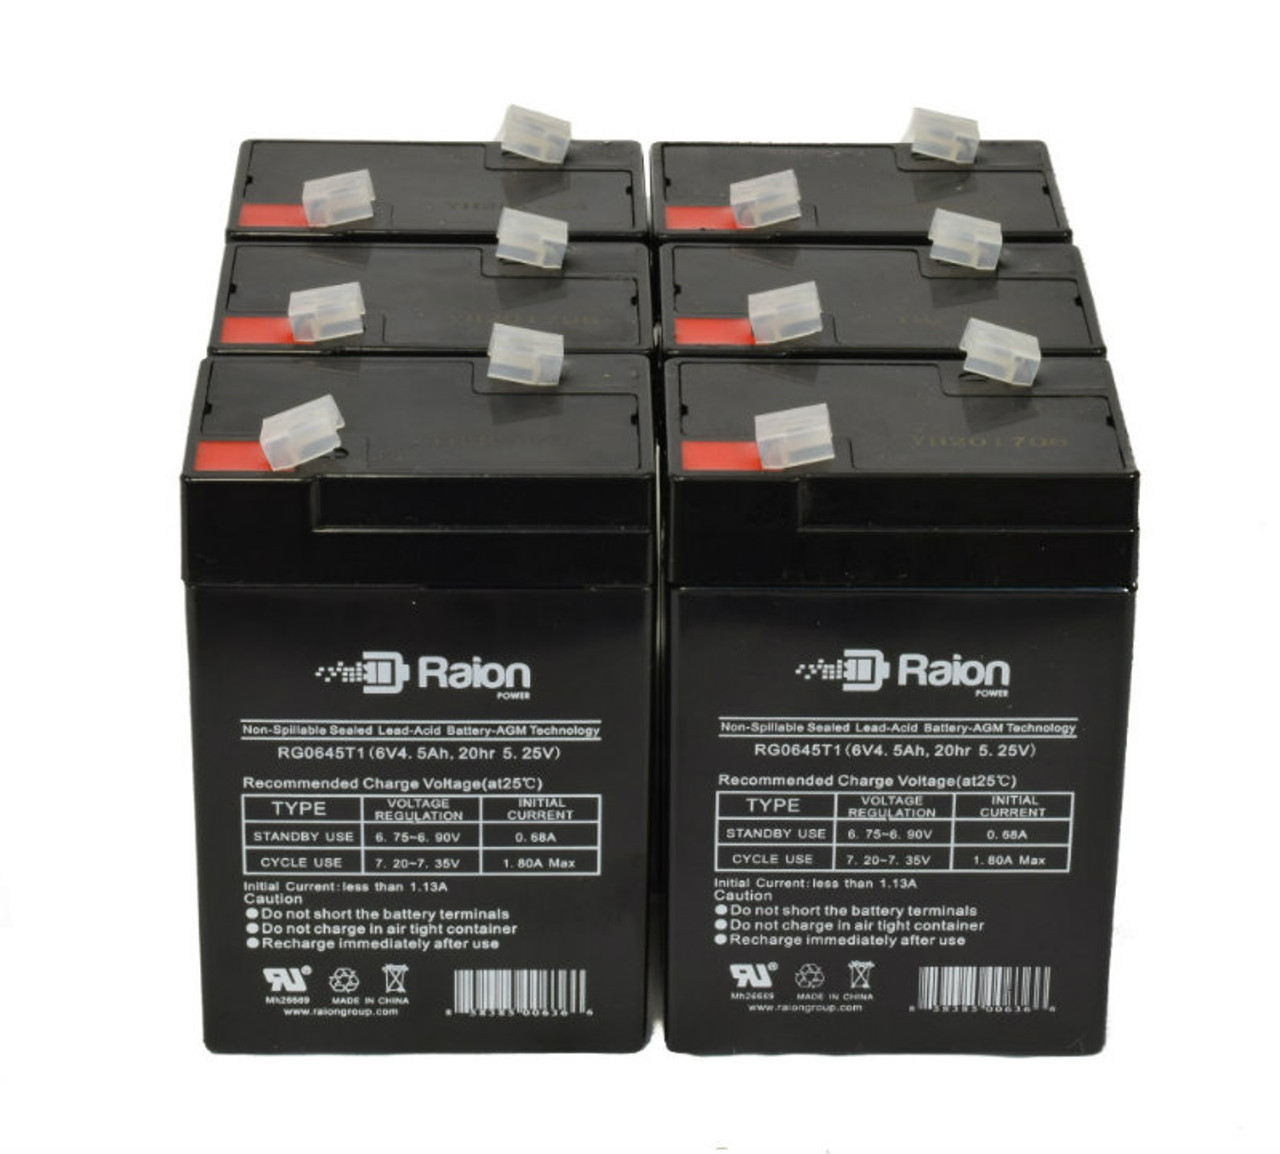 Raion Power 6 Volt 4.5Ah RG0645T1 Replacement Battery for Edwards 1799-108PT - 6 Pack